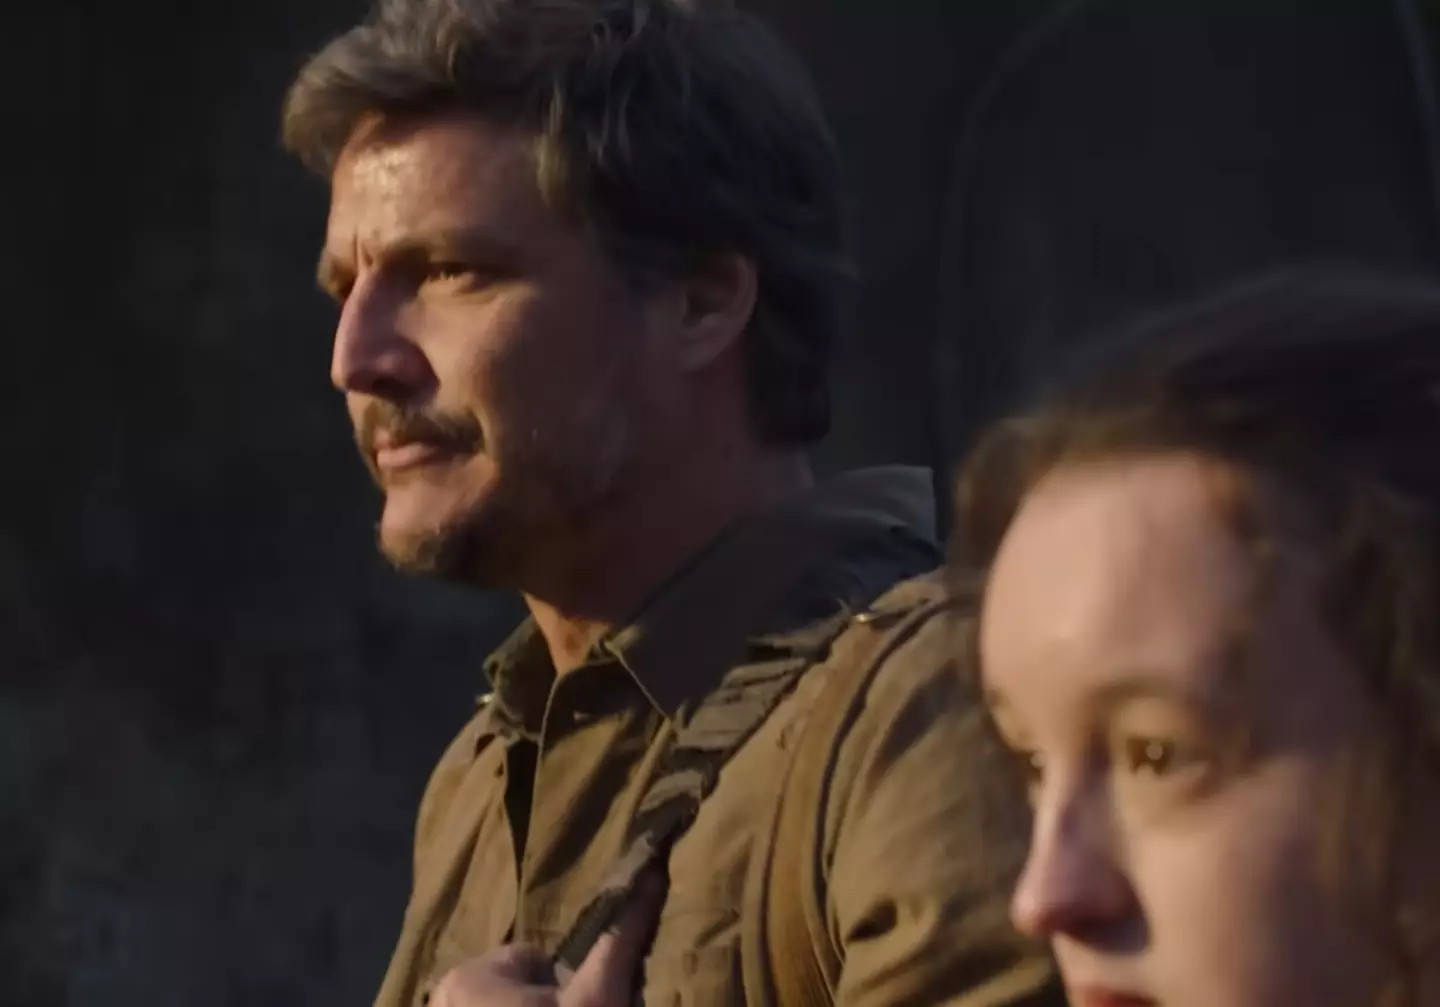 The Last Of Us sees Joel (Pedro Pascal) and Ellie (Bella Ramsey) trying to survive after a terrible disease struck the US.